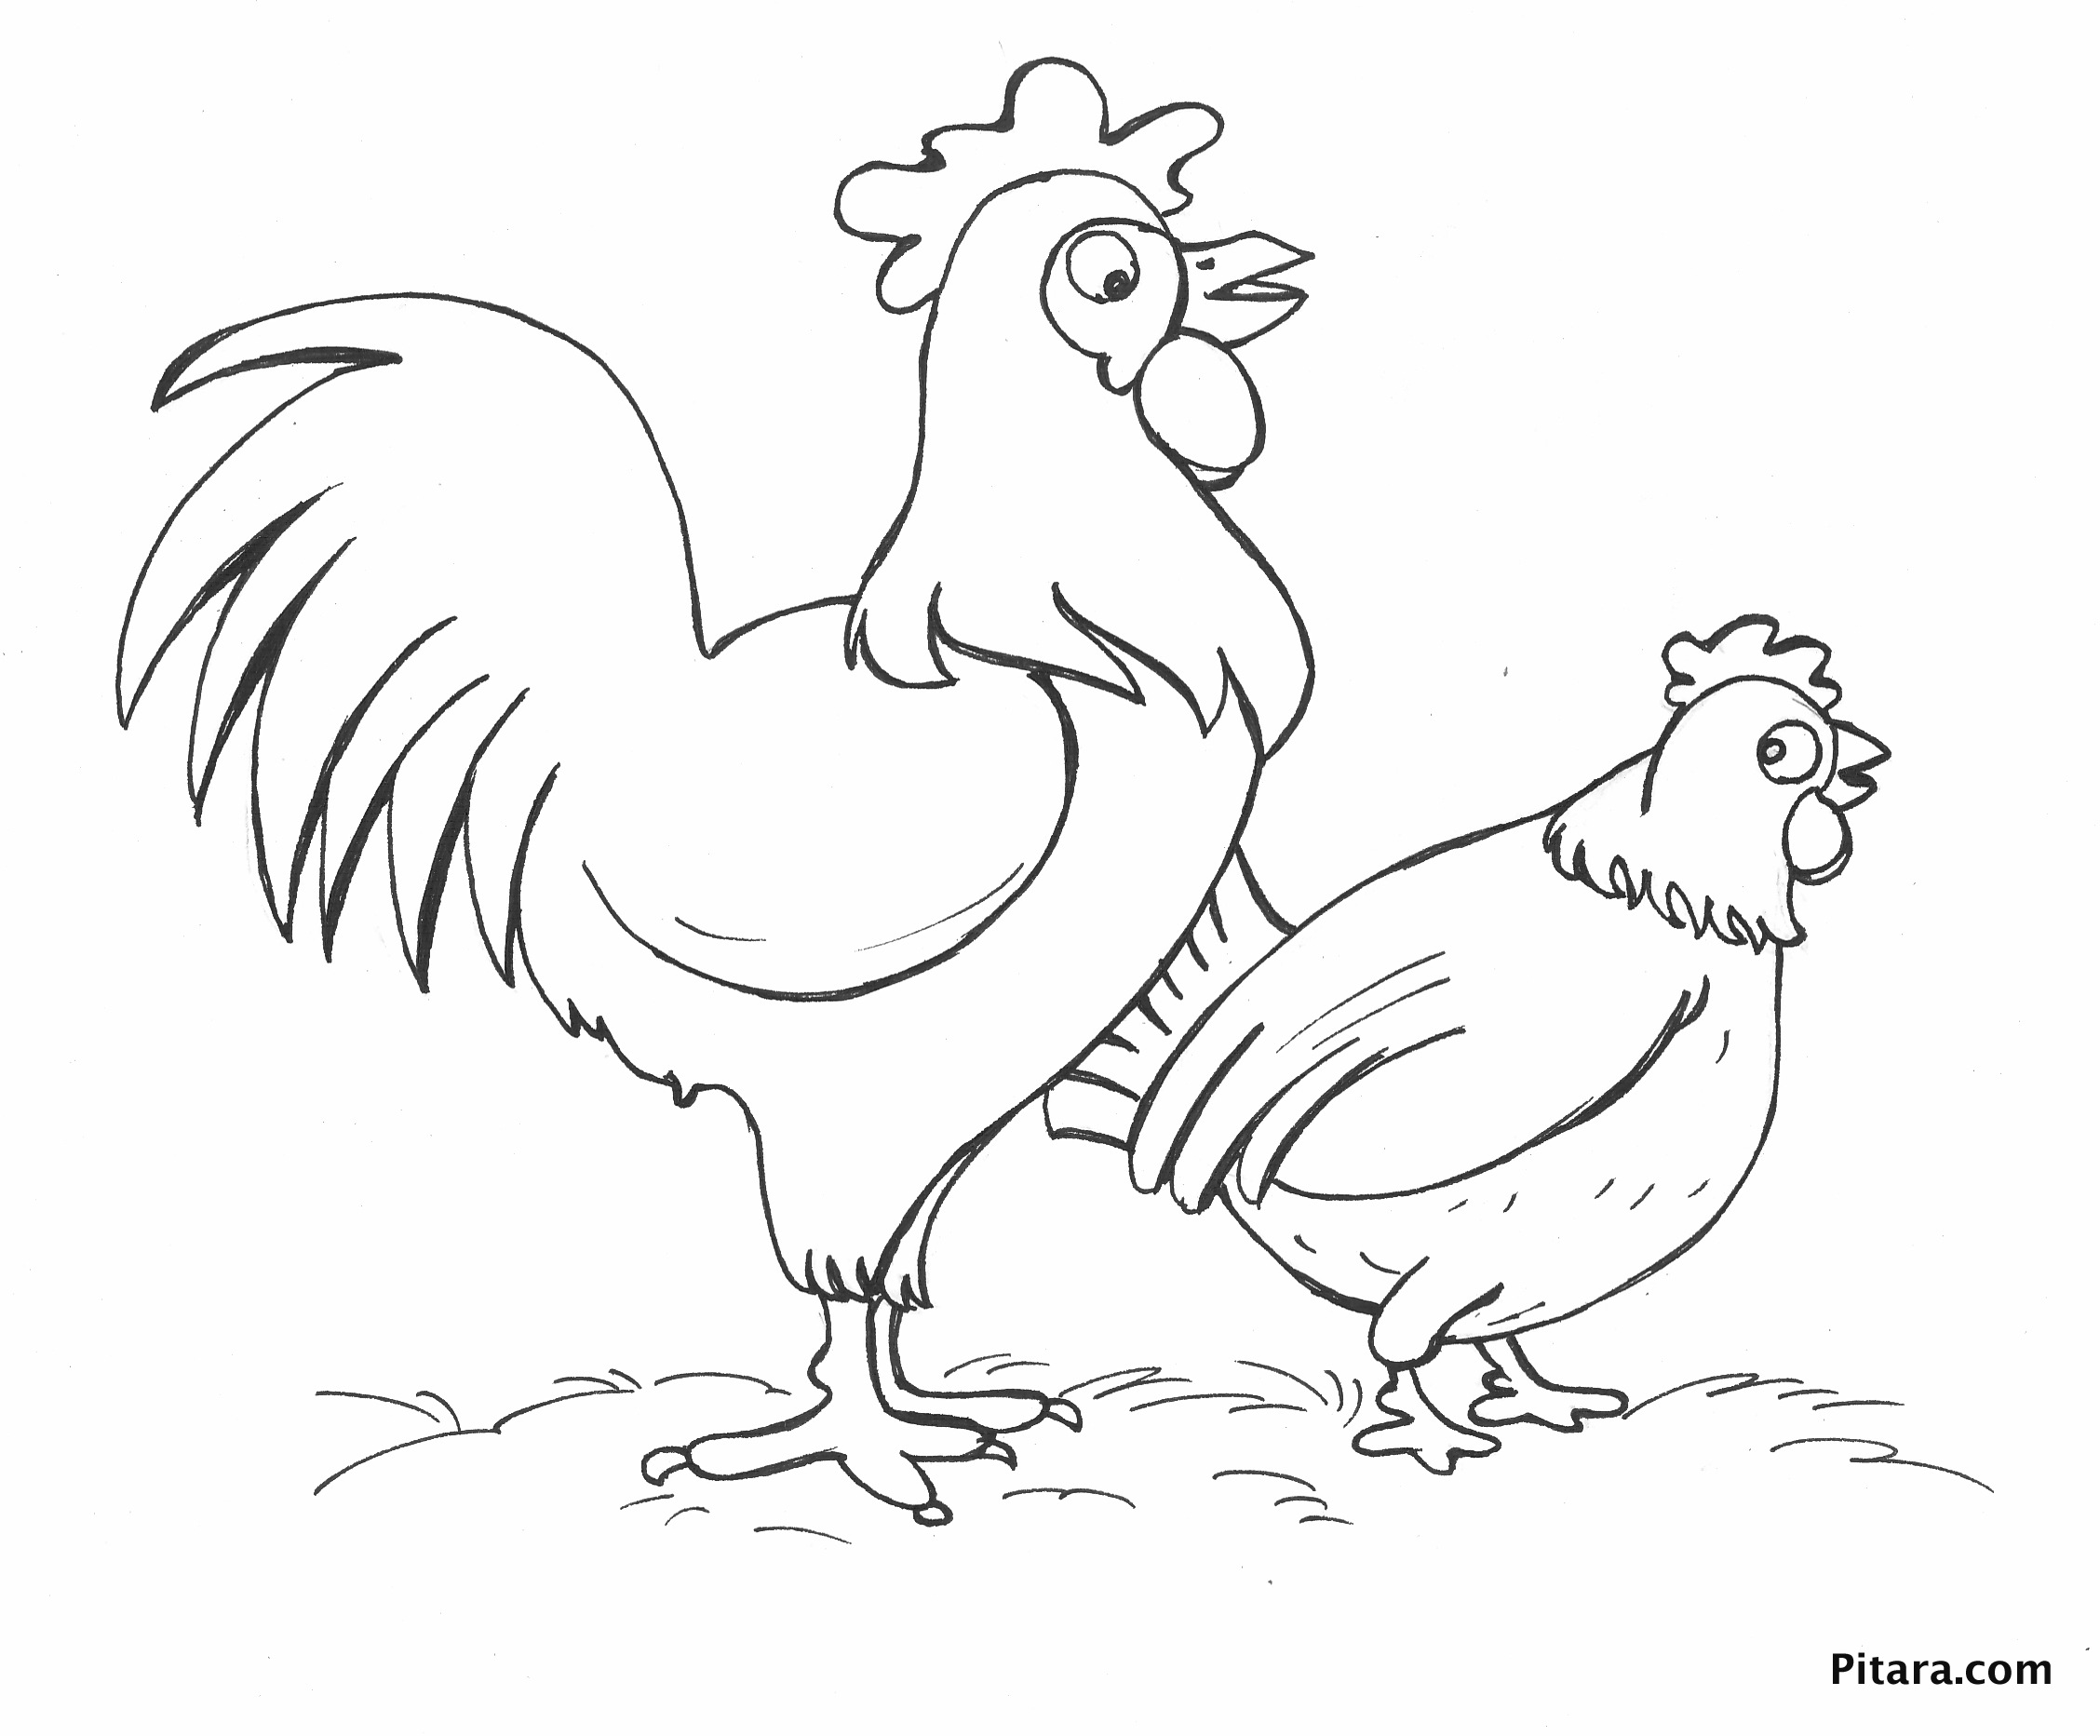 two-chickens-coloring-page-pitara-kids-network